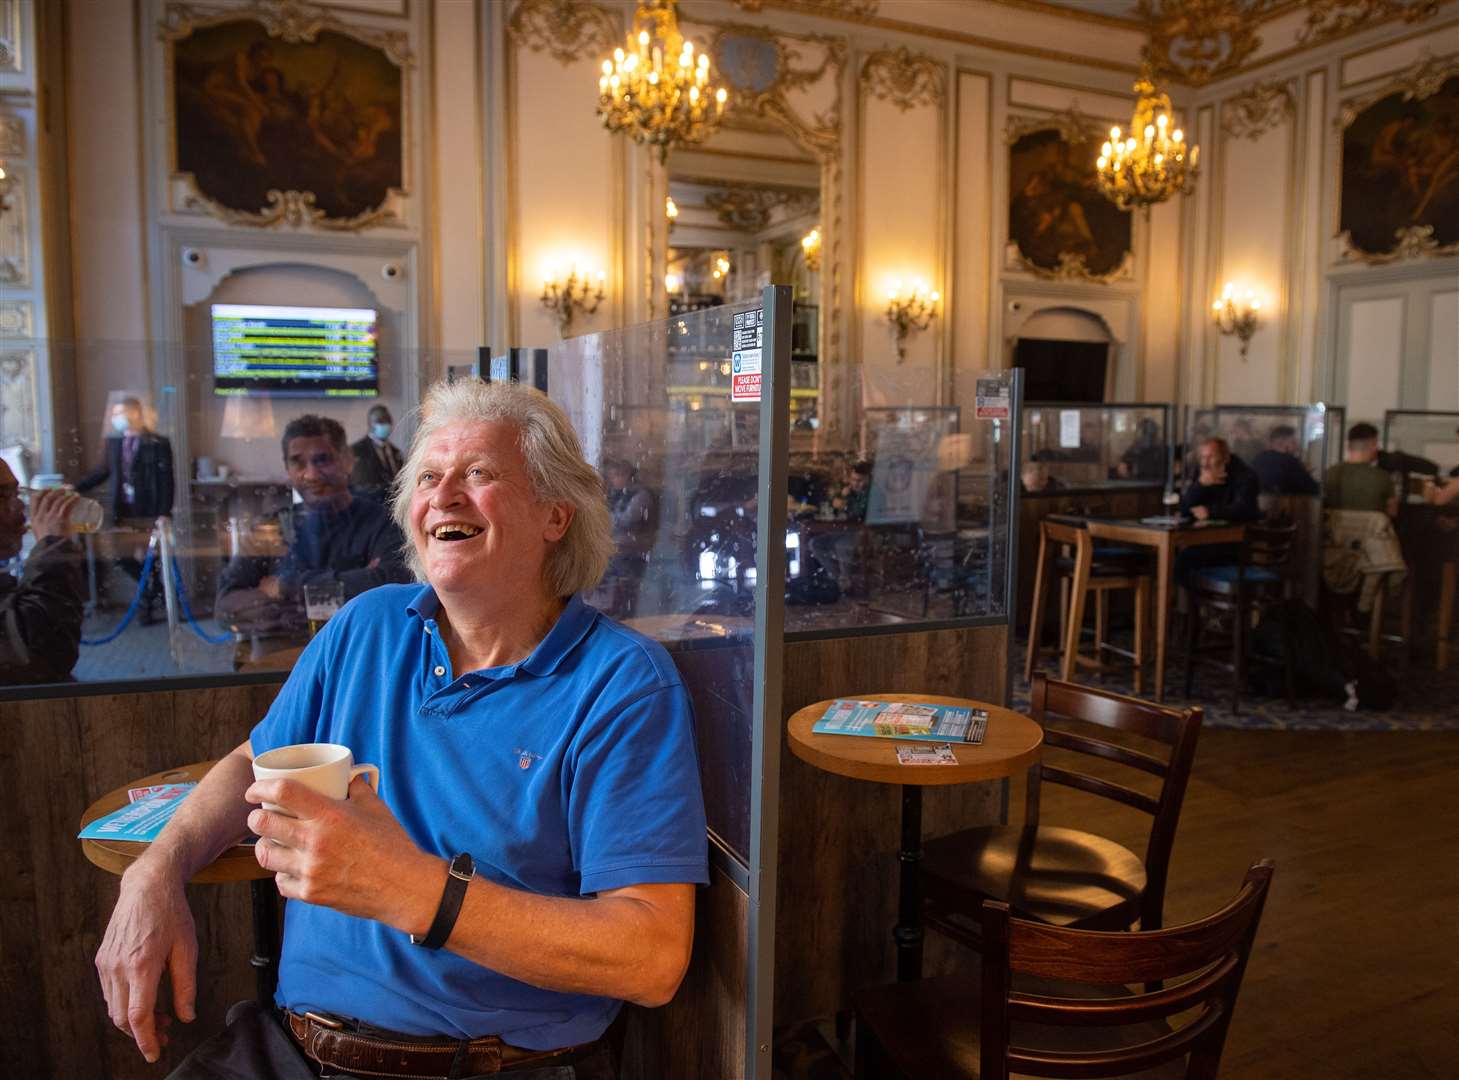 Wetherspoons founder and chairman Tim Martin said the pub chain continues to expect to make a loss for the year ending July 25 (Dominic Lipinski/PA)